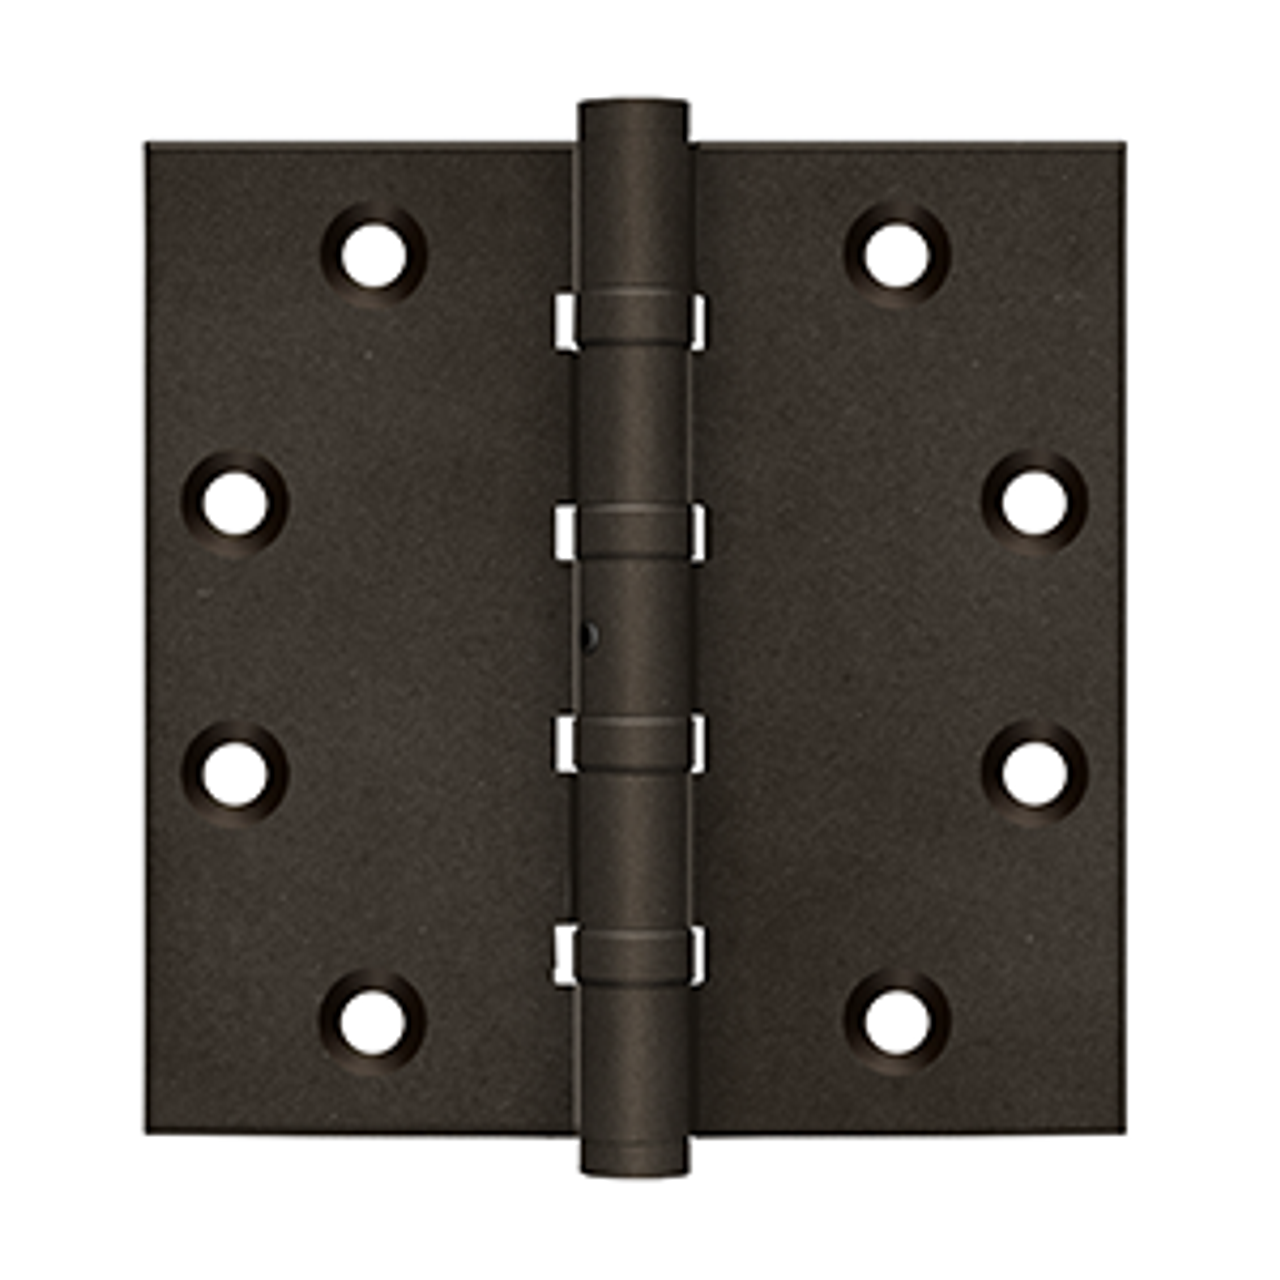 DELTANA DSB45NB 4-1/2" X 4-1/2" SQUARE HINGES NRP, BALL BEARINGS DISTRESSED FINISHES SOLID BRASS